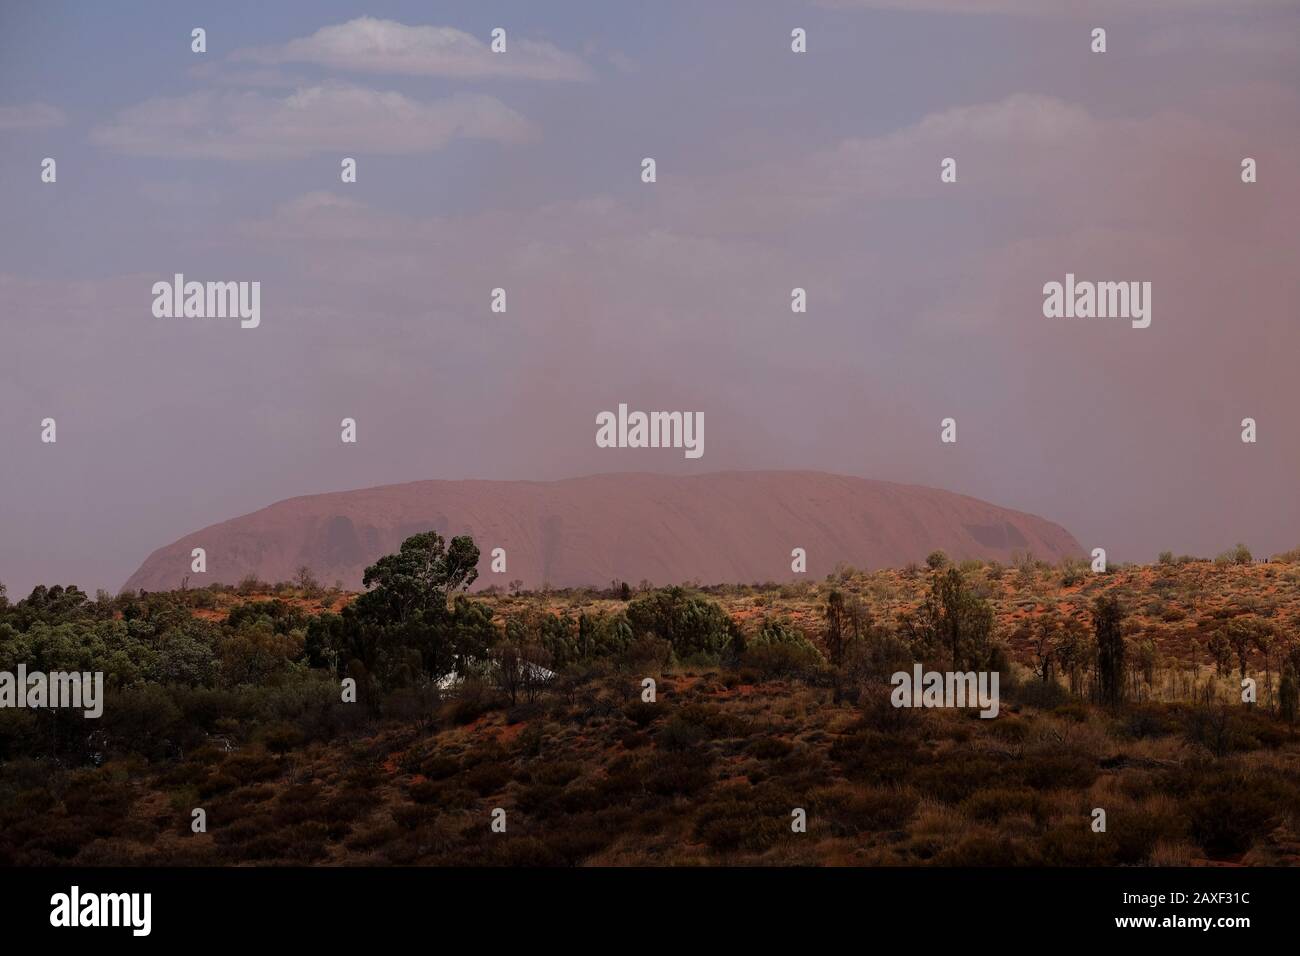 A cloud of red dust storm passes in front of Uluru, the massive sandstone monolith in the Northern Territory’s 'Red Centre' arid desert region Stock Photo